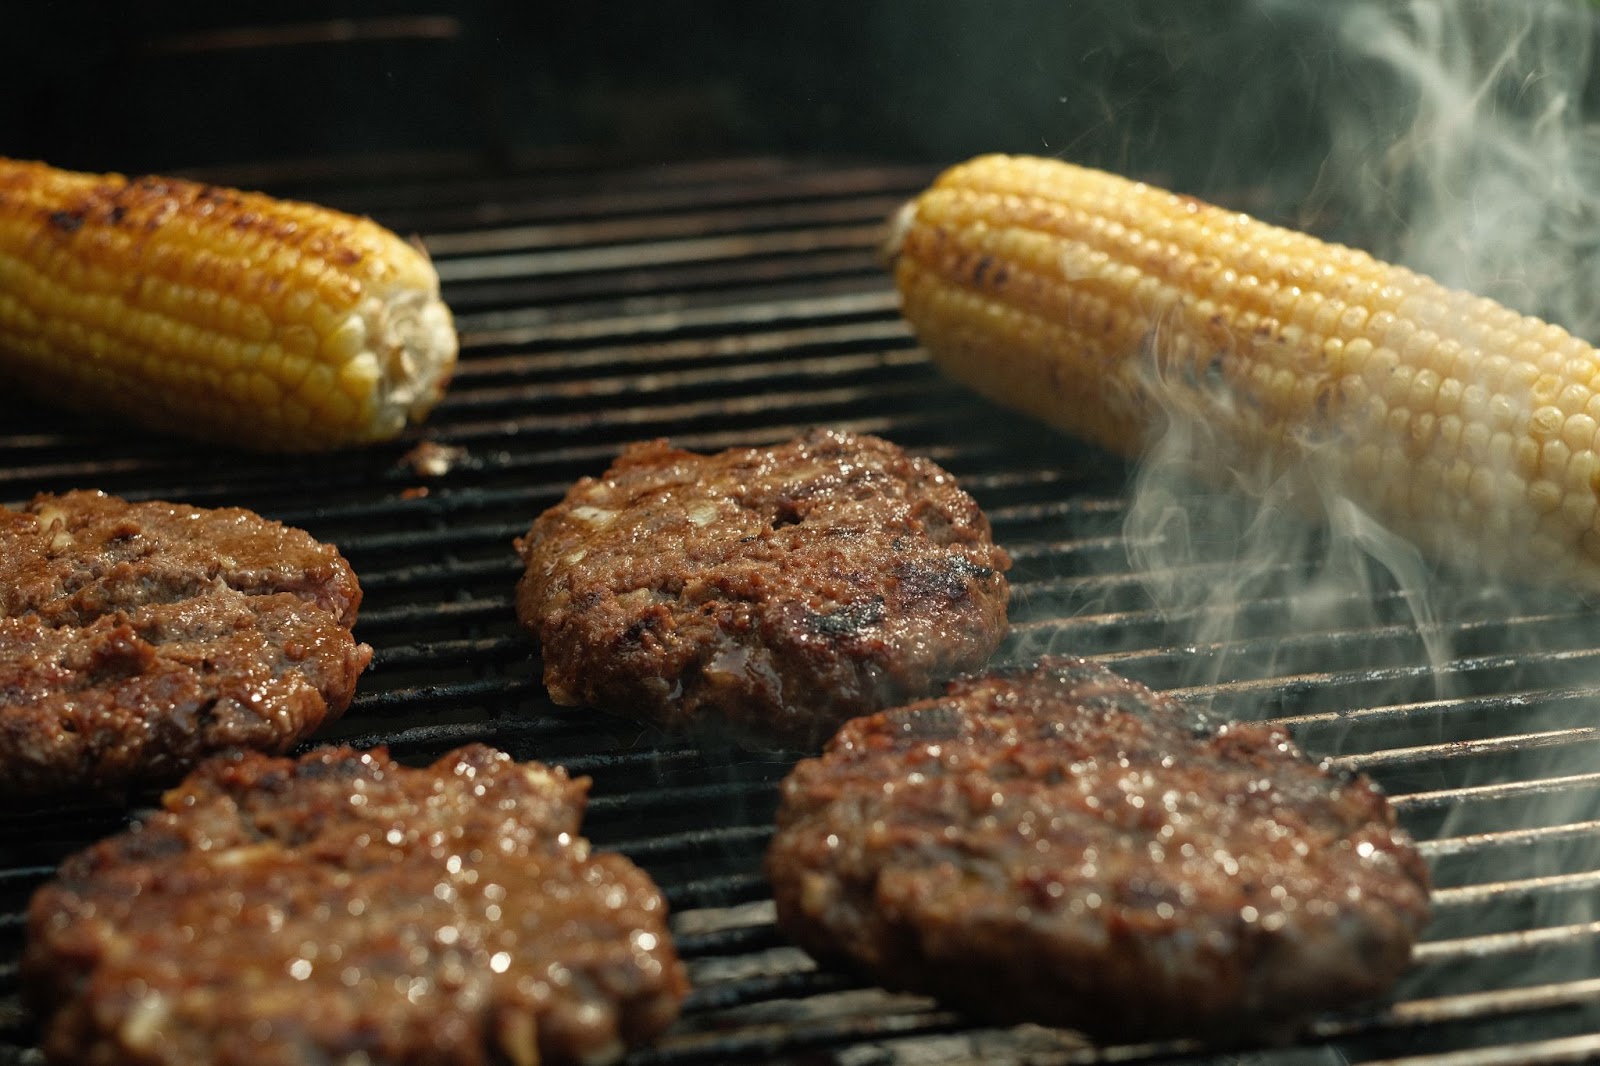 four burger patties from T Bones in Kelowna, on the grill smoking with lightly charred corn on the grill in the background